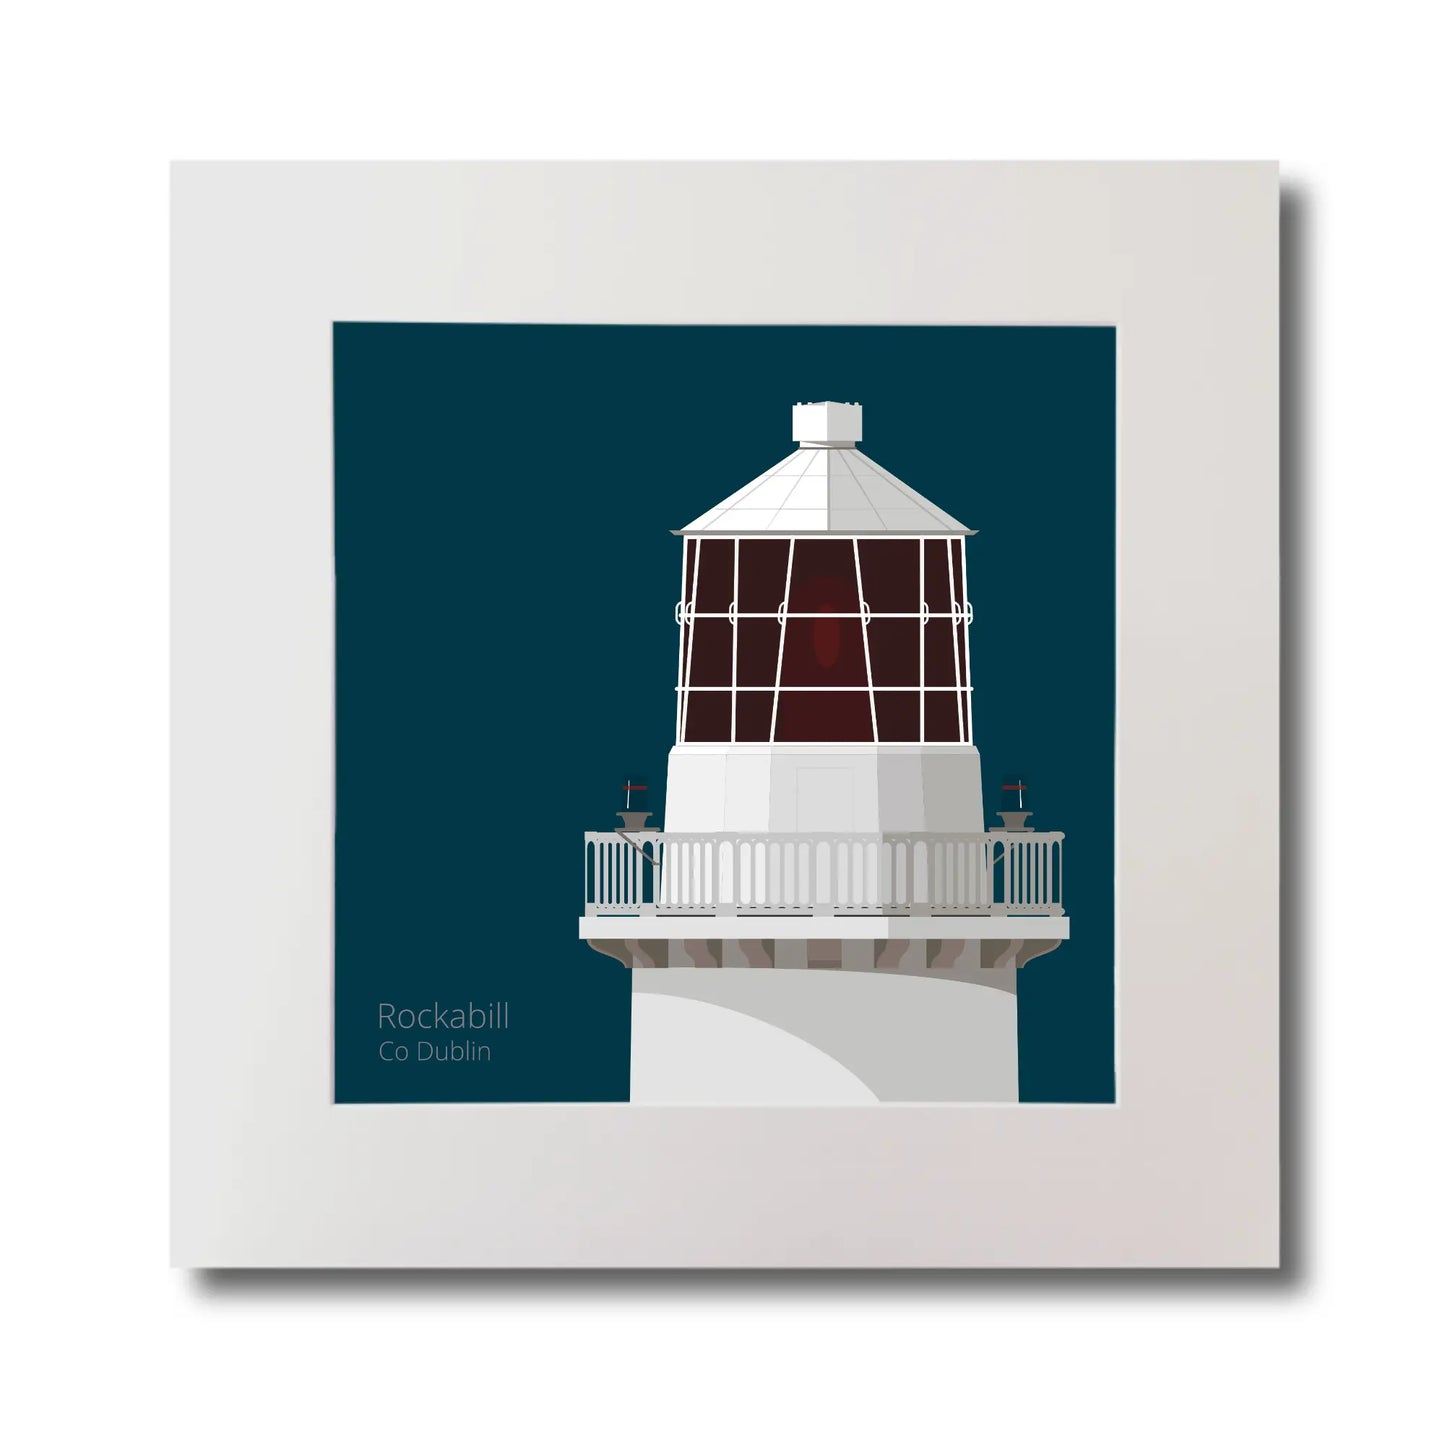 Illustration of Rockabill lighthouse on a midnight blue background, mounted and measuring 30x30cm.